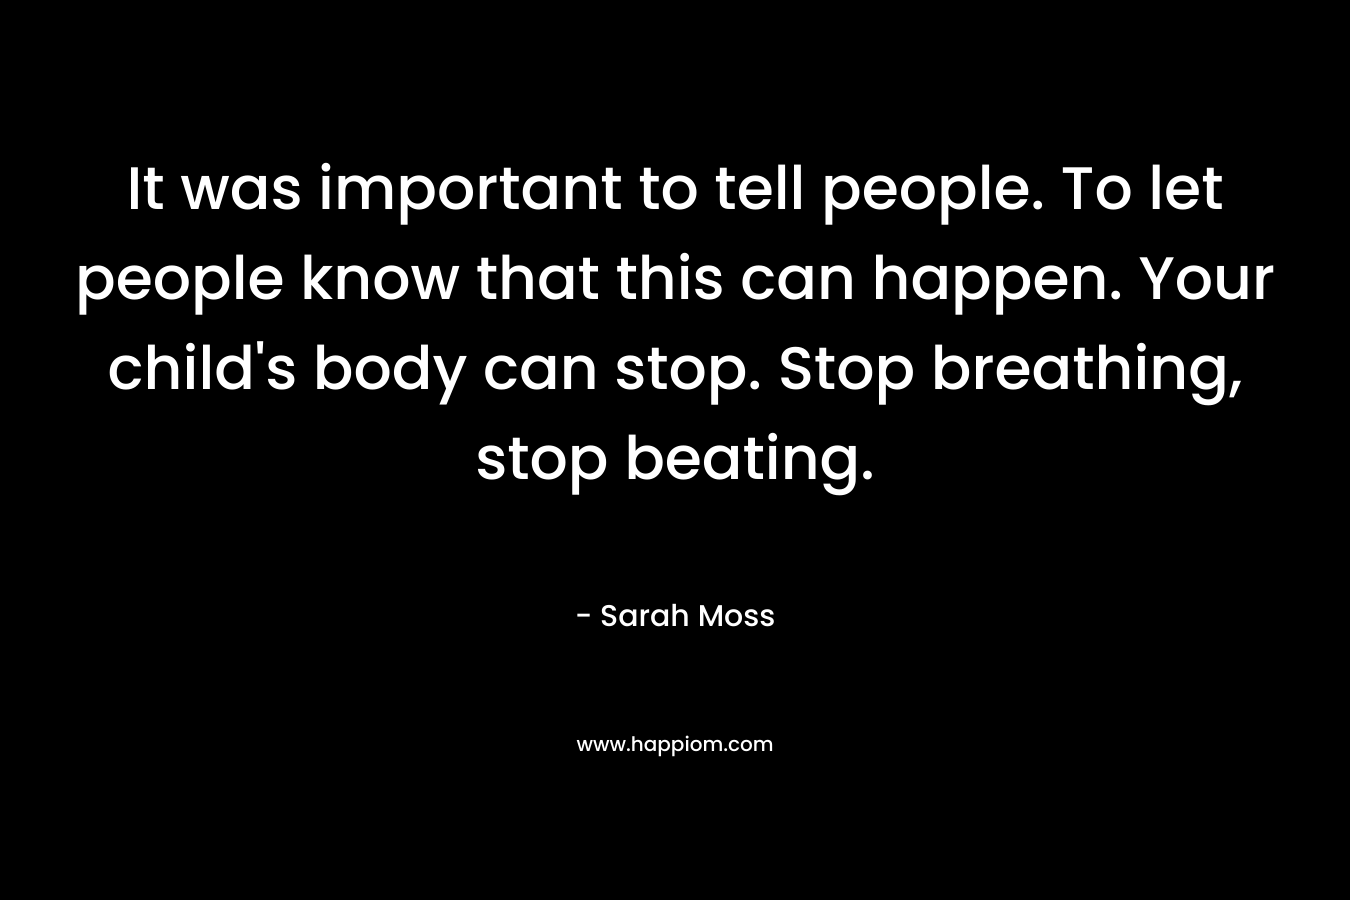 It was important to tell people. To let people know that this can happen. Your child’s body can stop. Stop breathing, stop beating. – Sarah Moss